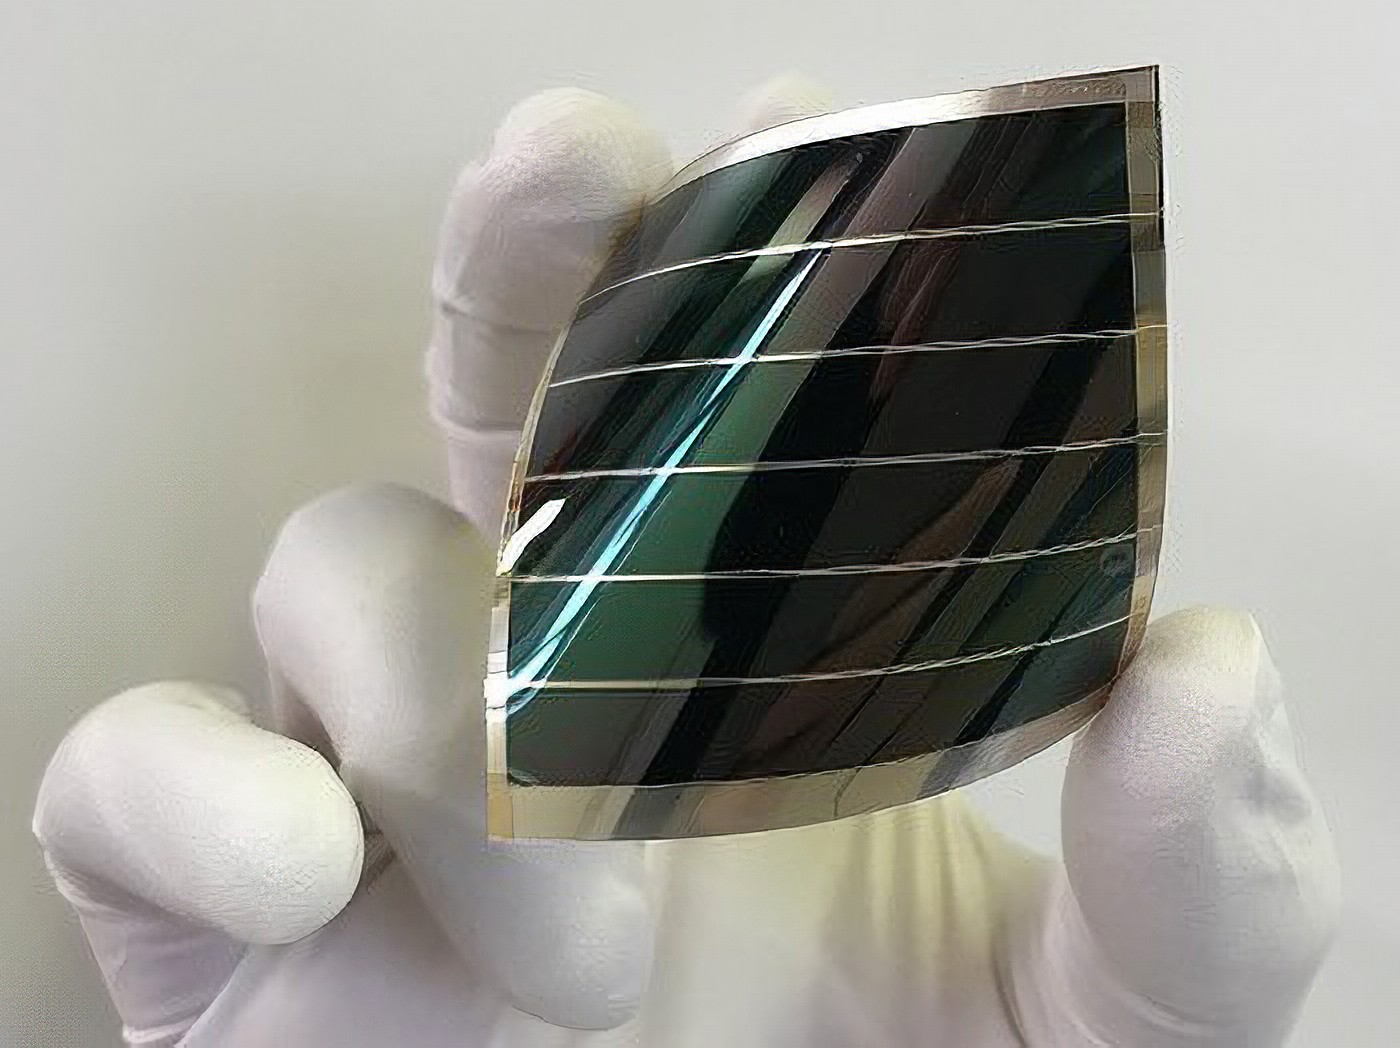 an-organic-solar-cell-with-25-efficiency-pv-magazine-international